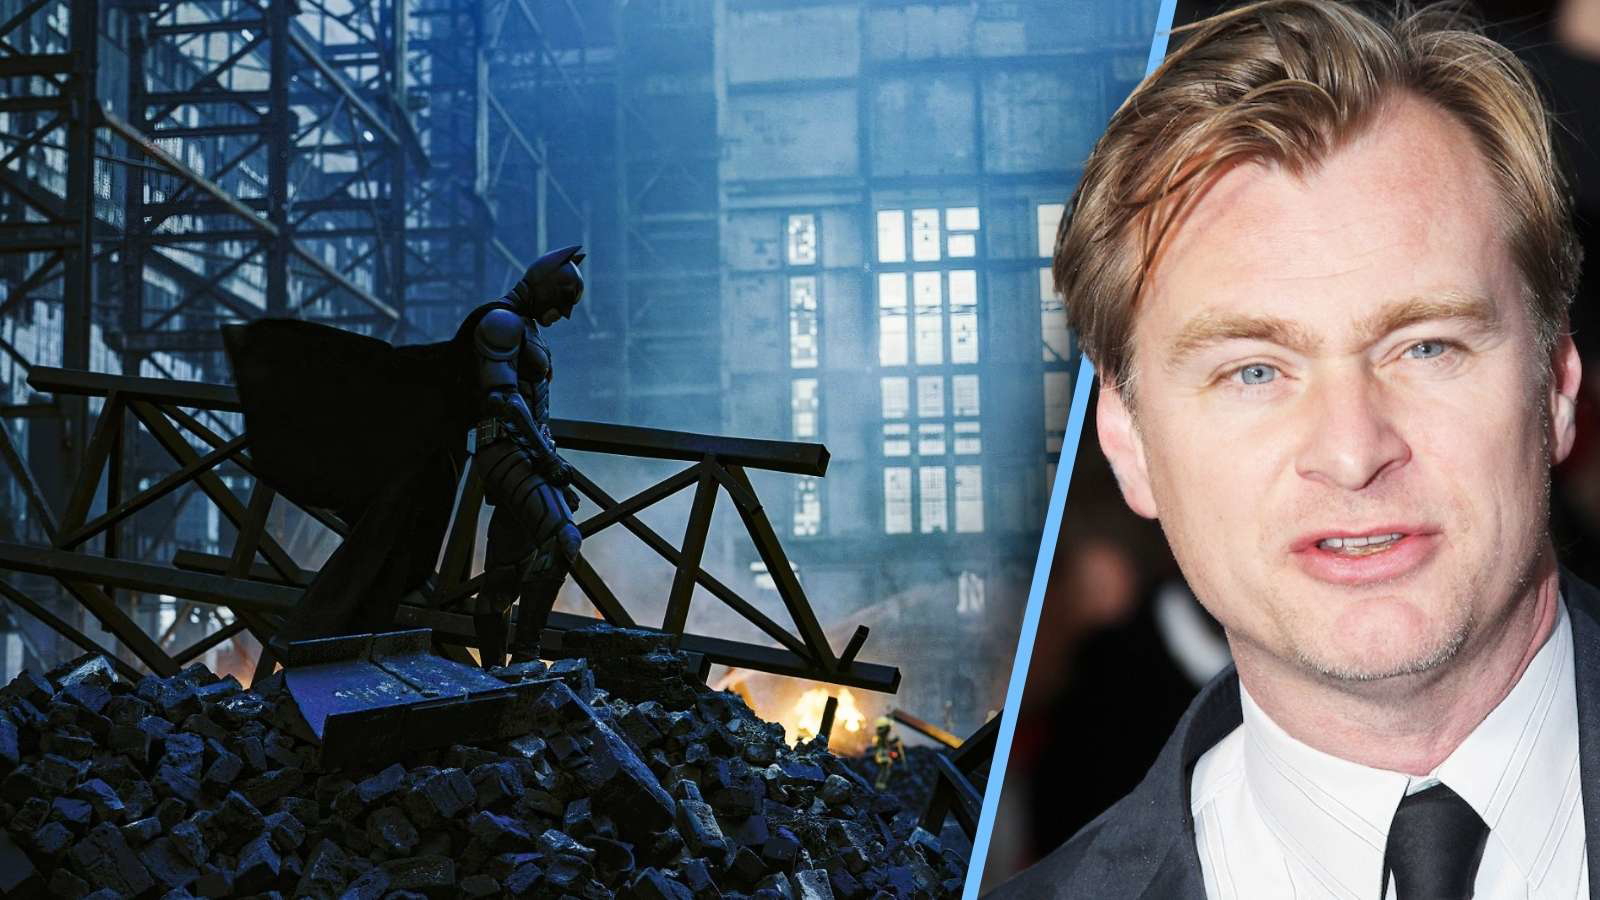 One ‘The Dark Knight’ Scene Was So Dangerous to Film It Could’ve Easily Killed the Stuntman and Ruined Christopher Nolan’s Entire Career